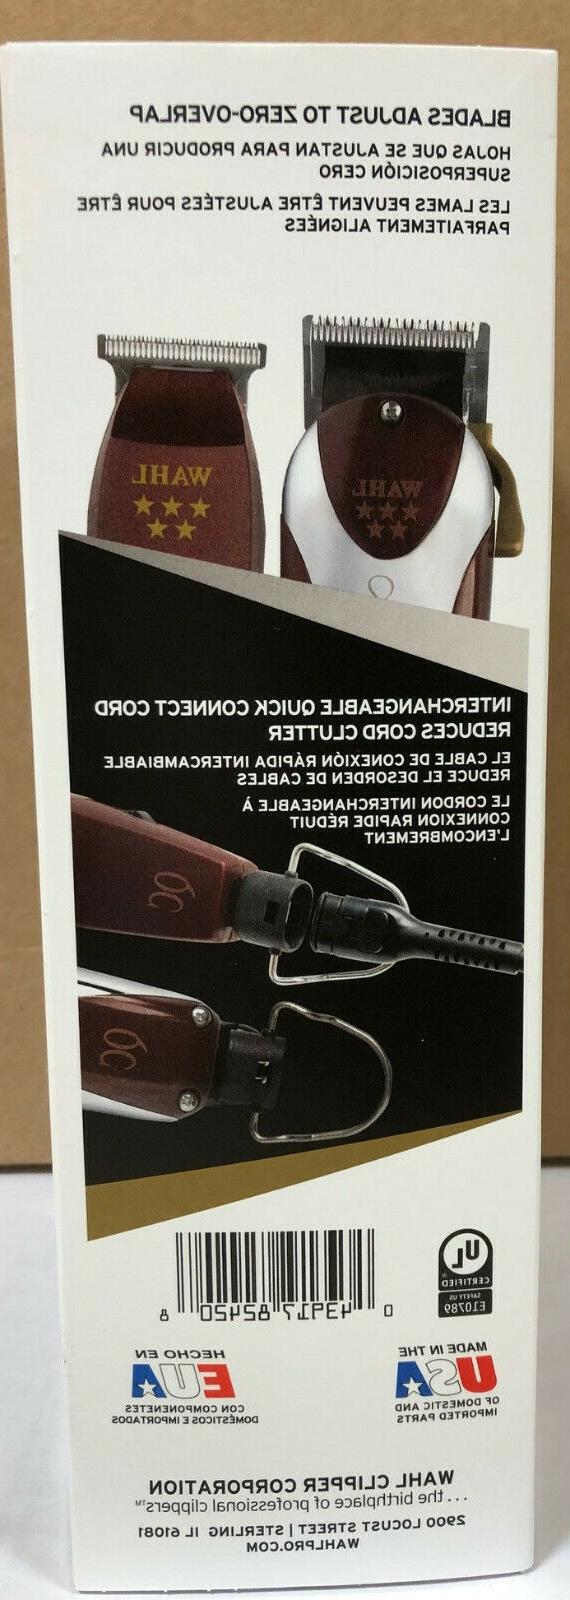 wahl 5 star unicord combo clipper & trimmer set 8242